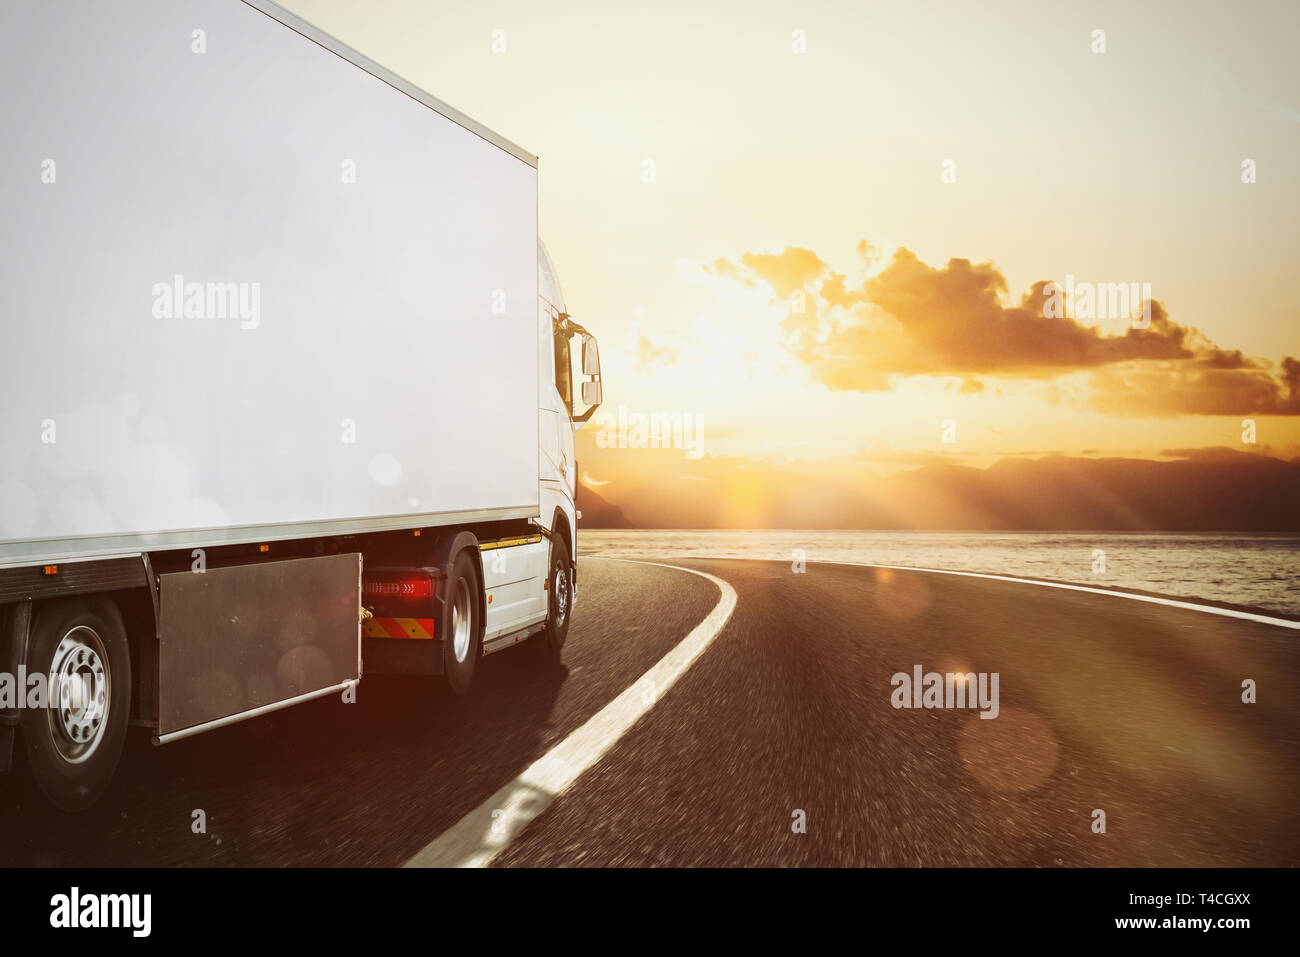 White truck moving on the road in a natural landscape at sunset Stock Photo